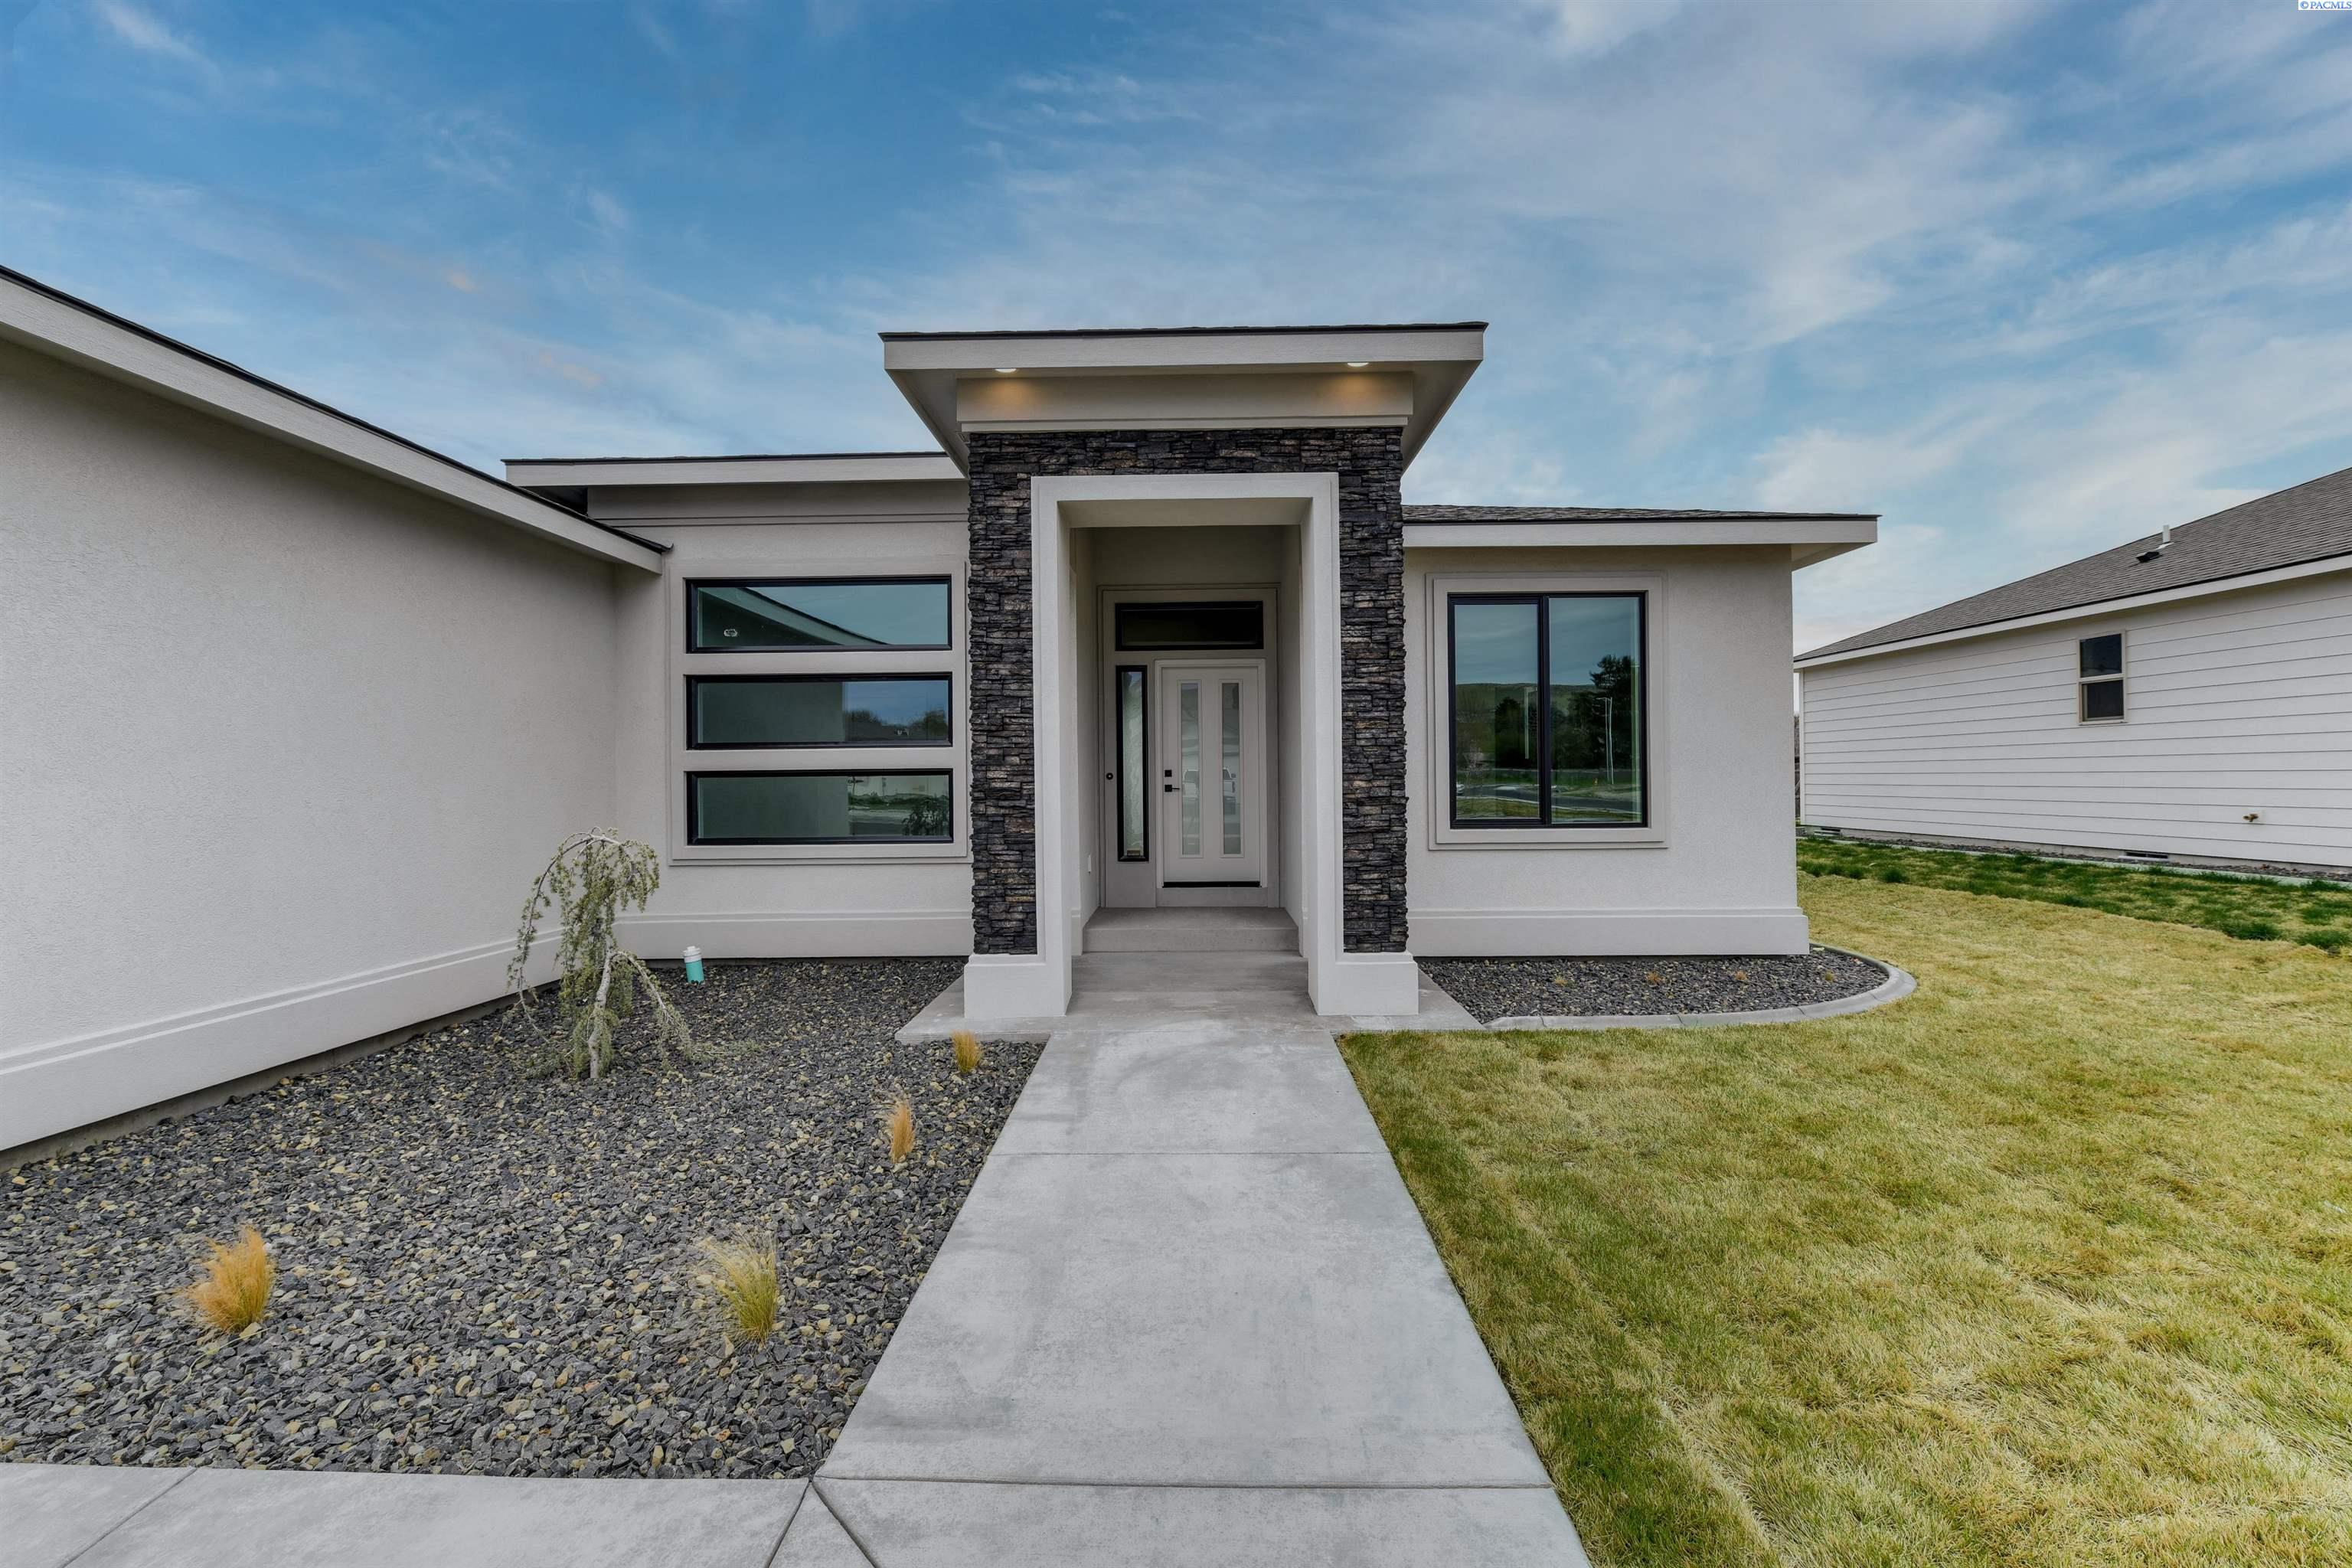 1580 Palermo Ave, Richland, Washington, 99352, United States, 3 Bedrooms Bedrooms, ,1 BathroomBathrooms,Residential,For Sale,1580 Palermo Ave,1461979